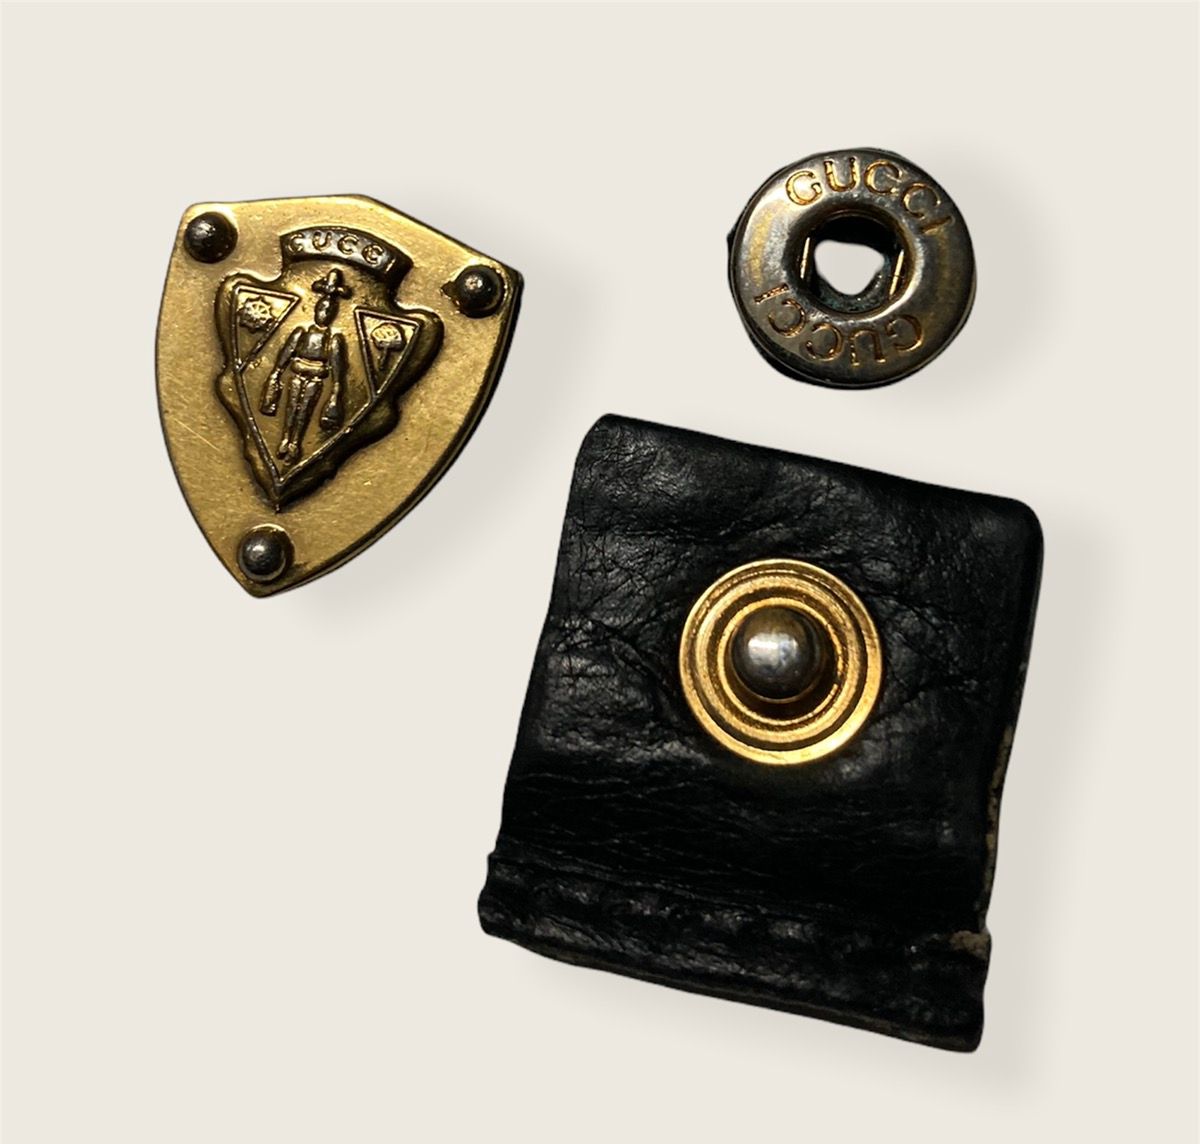 Gucci Crest Pin Emblem and Button Accessories - 3